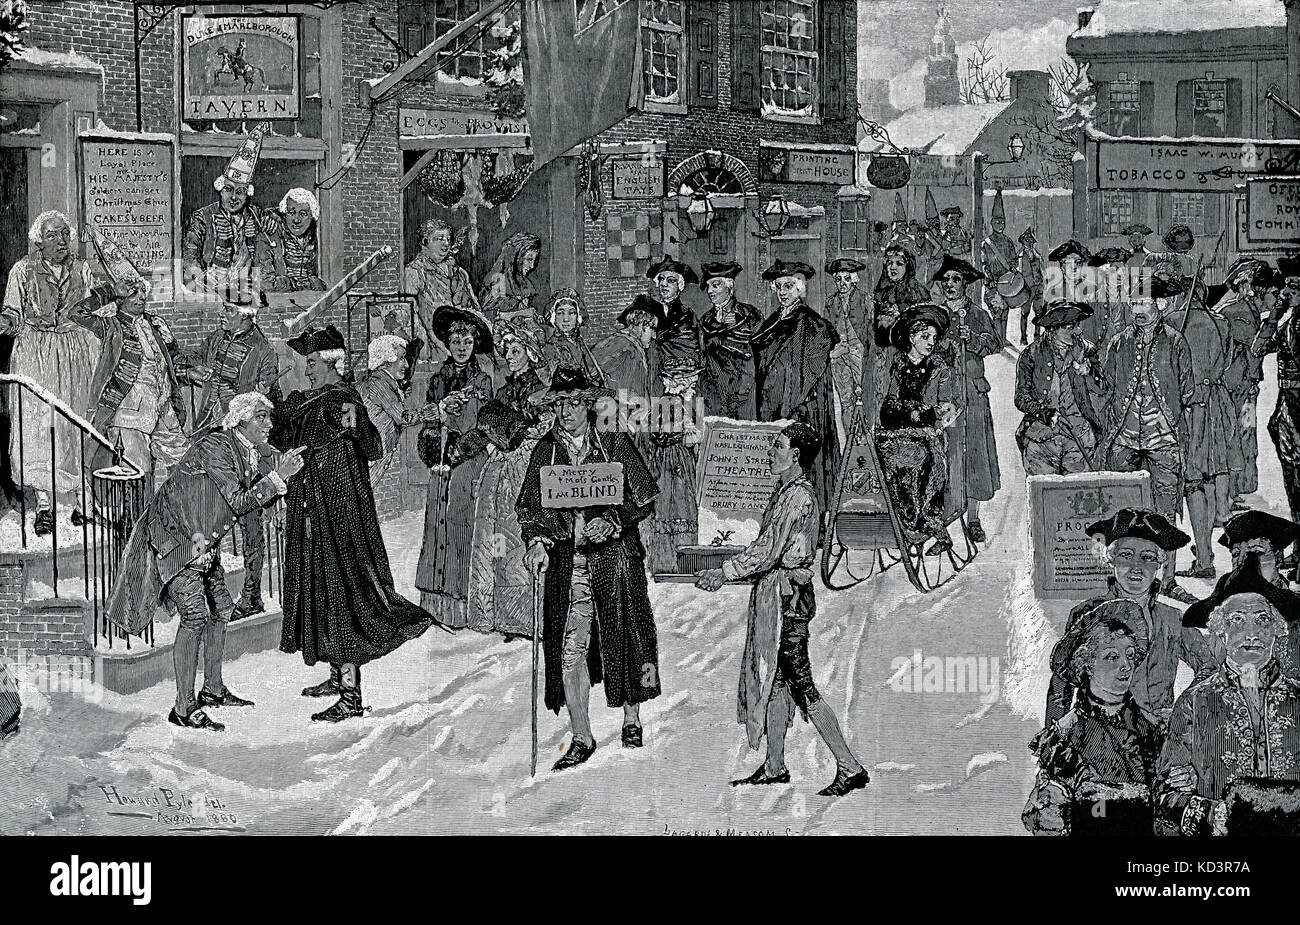 Christmas morning in old New York, 1700s before the American Revolution. Illustration by Howard Pyle, 1880 Stock Photo